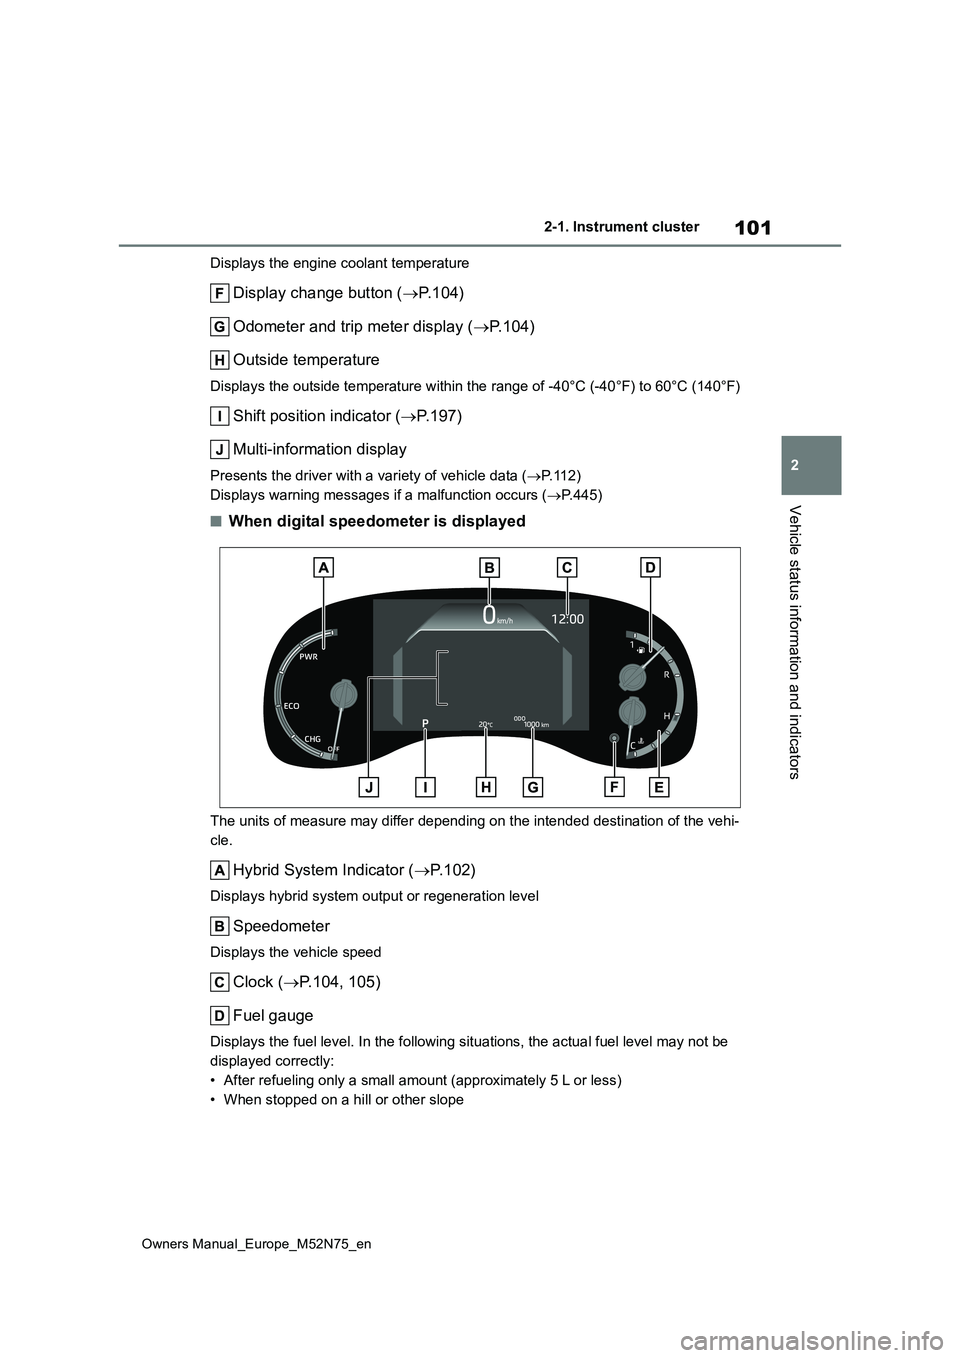 TOYOTA YARIS CROSS 2023  Owners Manual 101
2
Owners Manual_Europe_M52N75_en
2-1. Instrument cluster
Vehicle status information and indicators
Displays the engine coolant temperature
Display change button (P. 1 0 4 ) 
Odometer and trip m